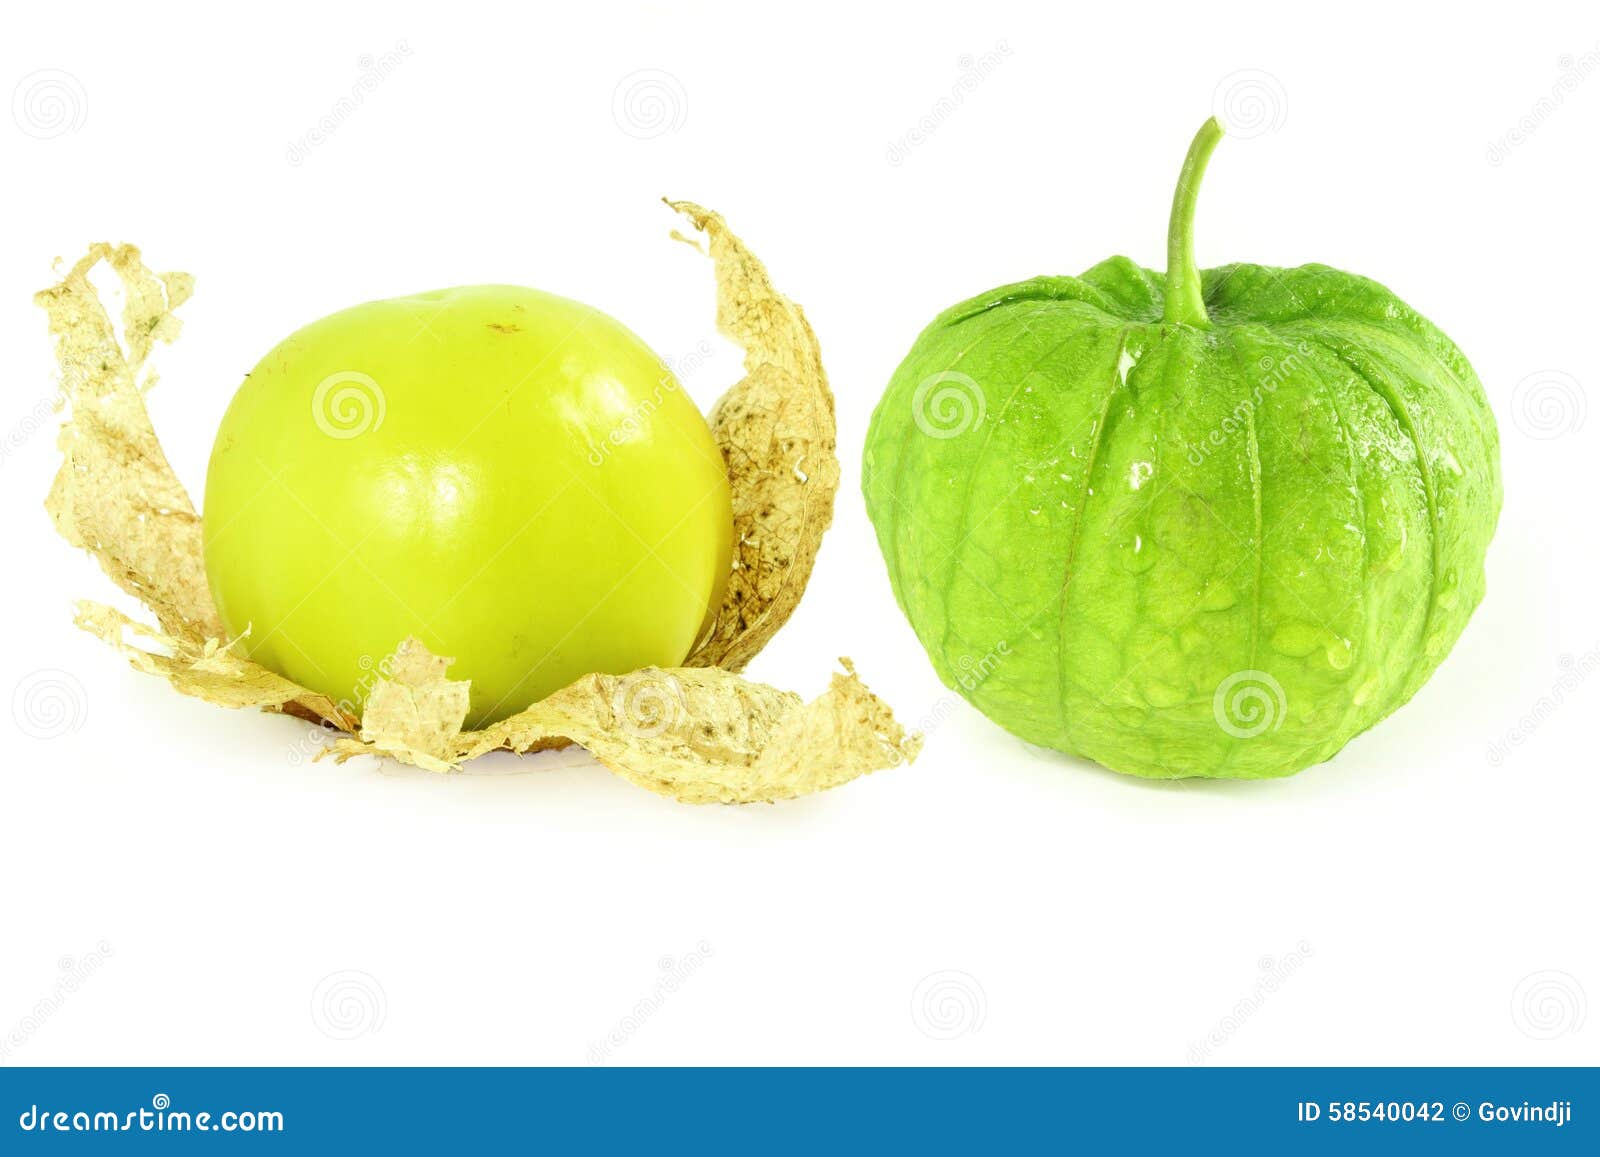 tomatillo or mexican green tomato fruit or vegetable